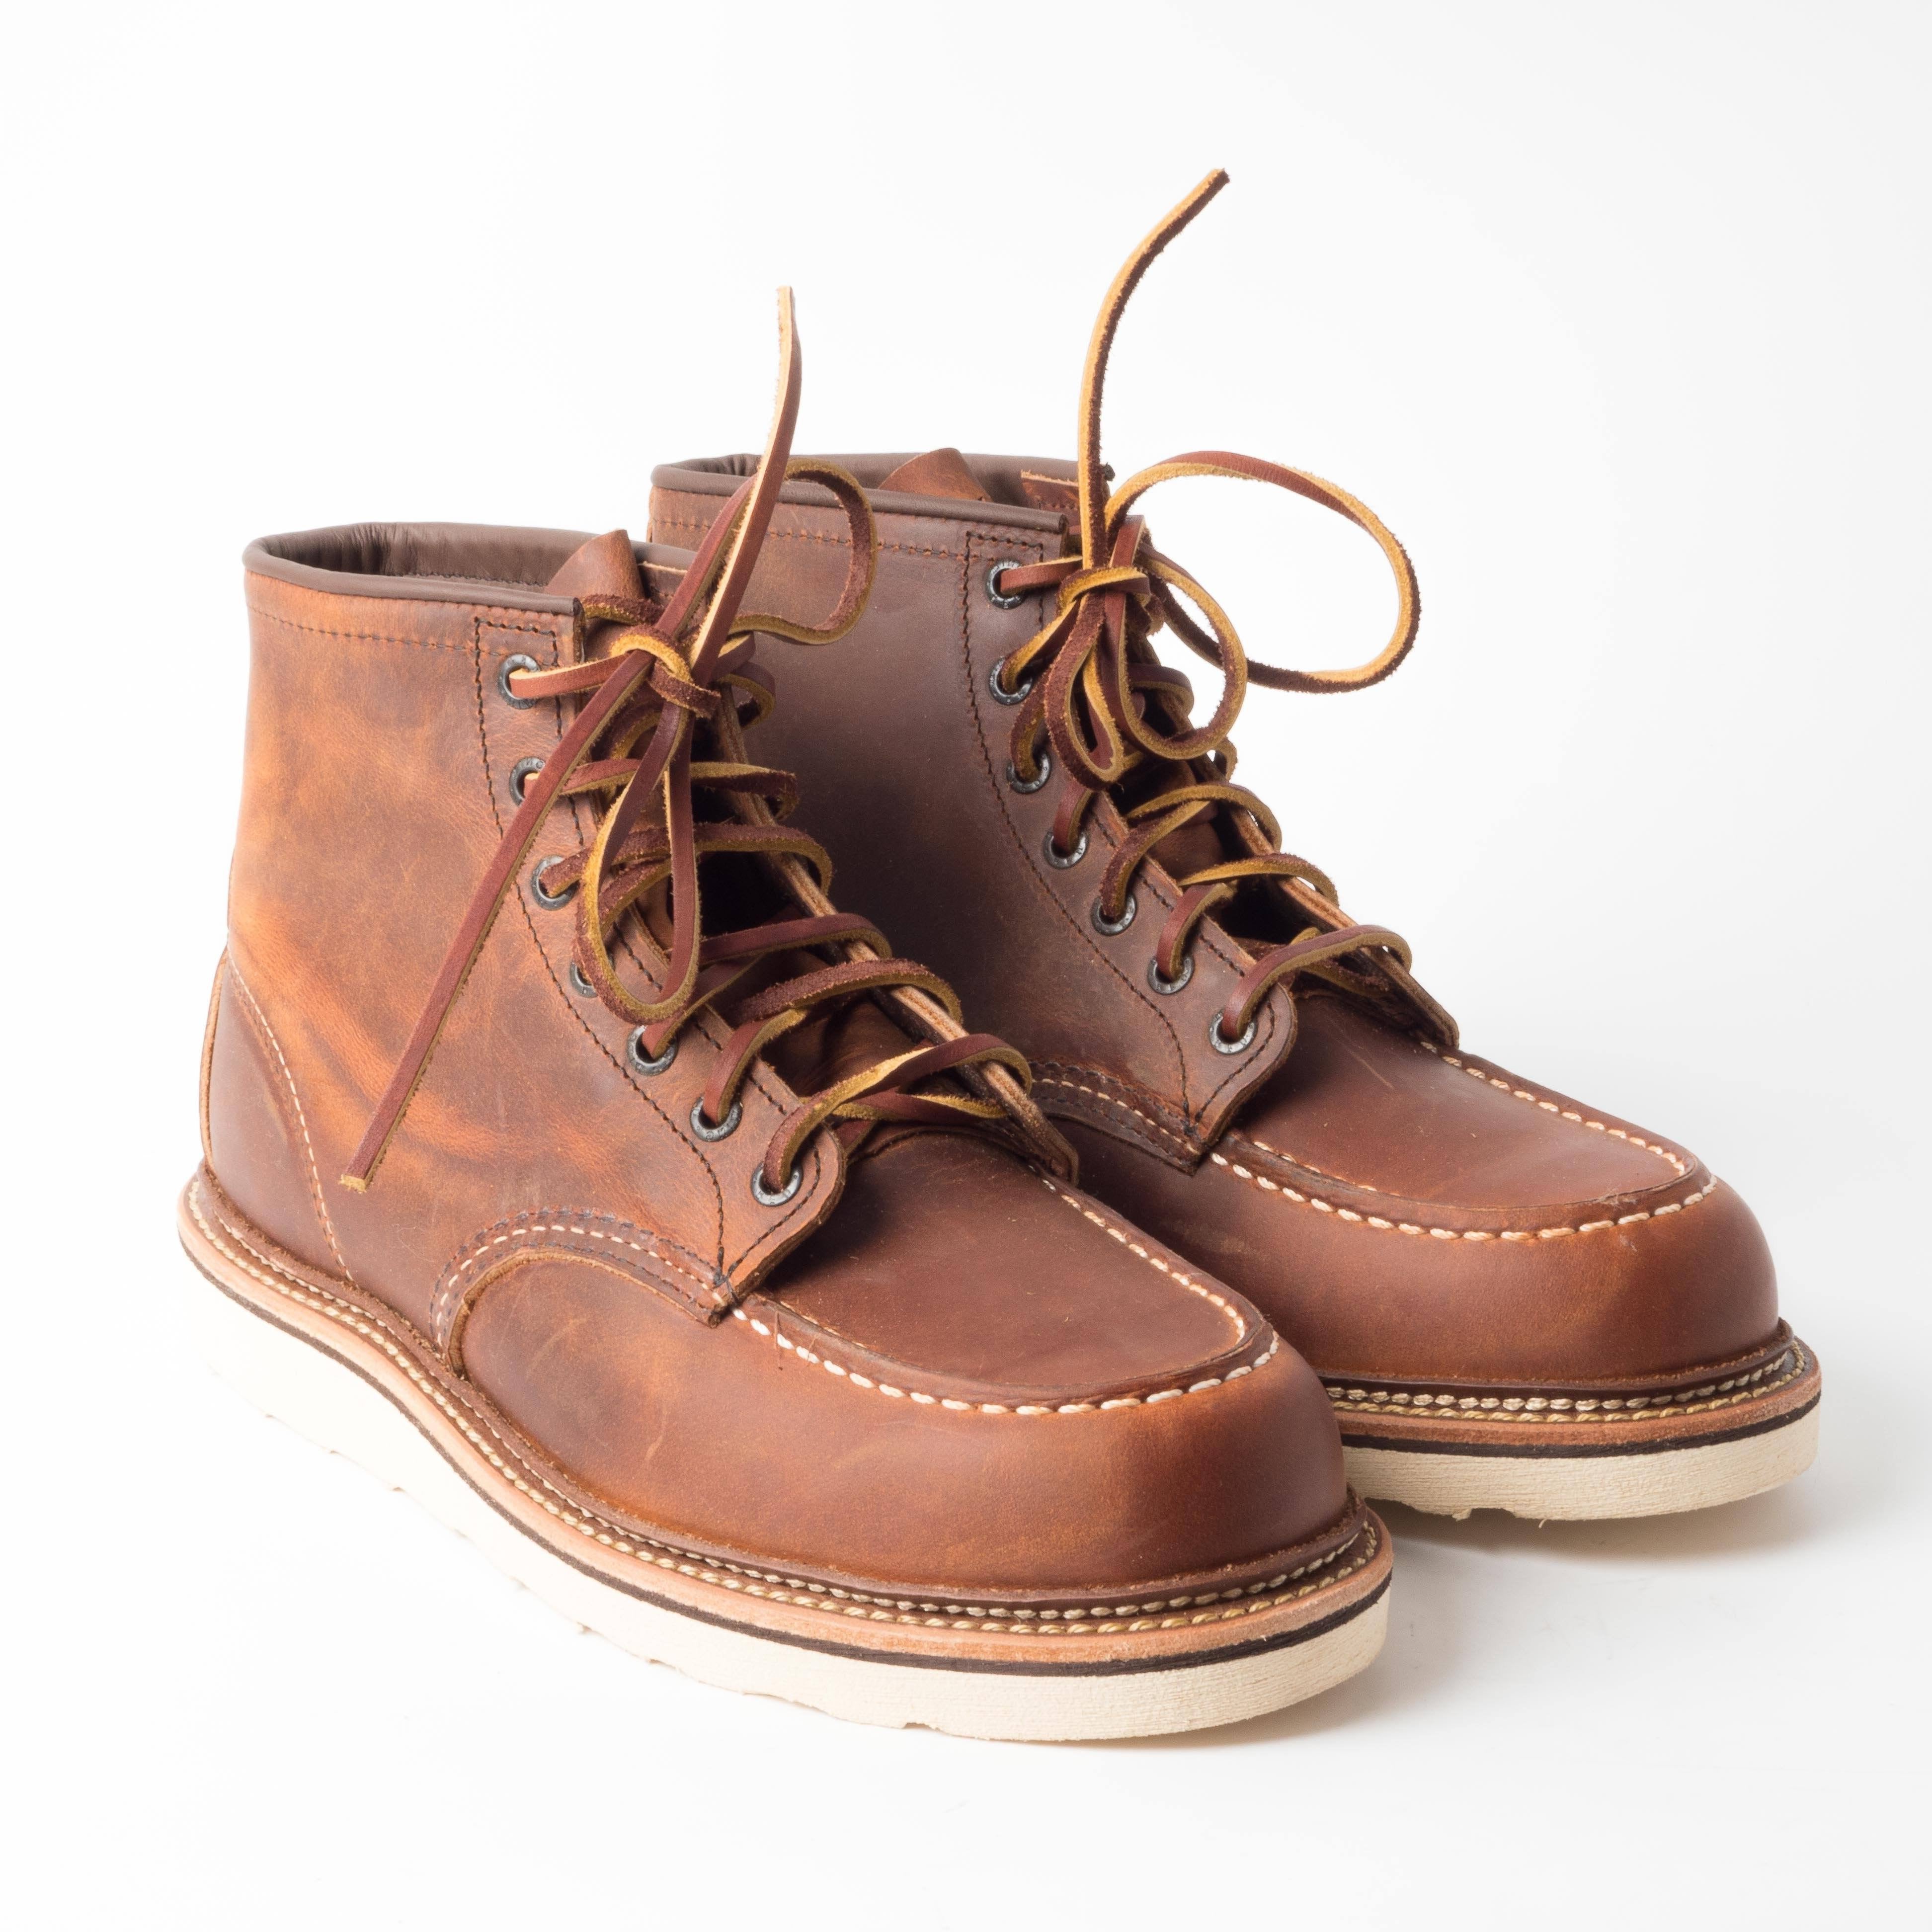 RED WING - AI 2018/19 - Classic Moc Toe 1907 - Copper Scarpe Uomo Red Wing Shoes 